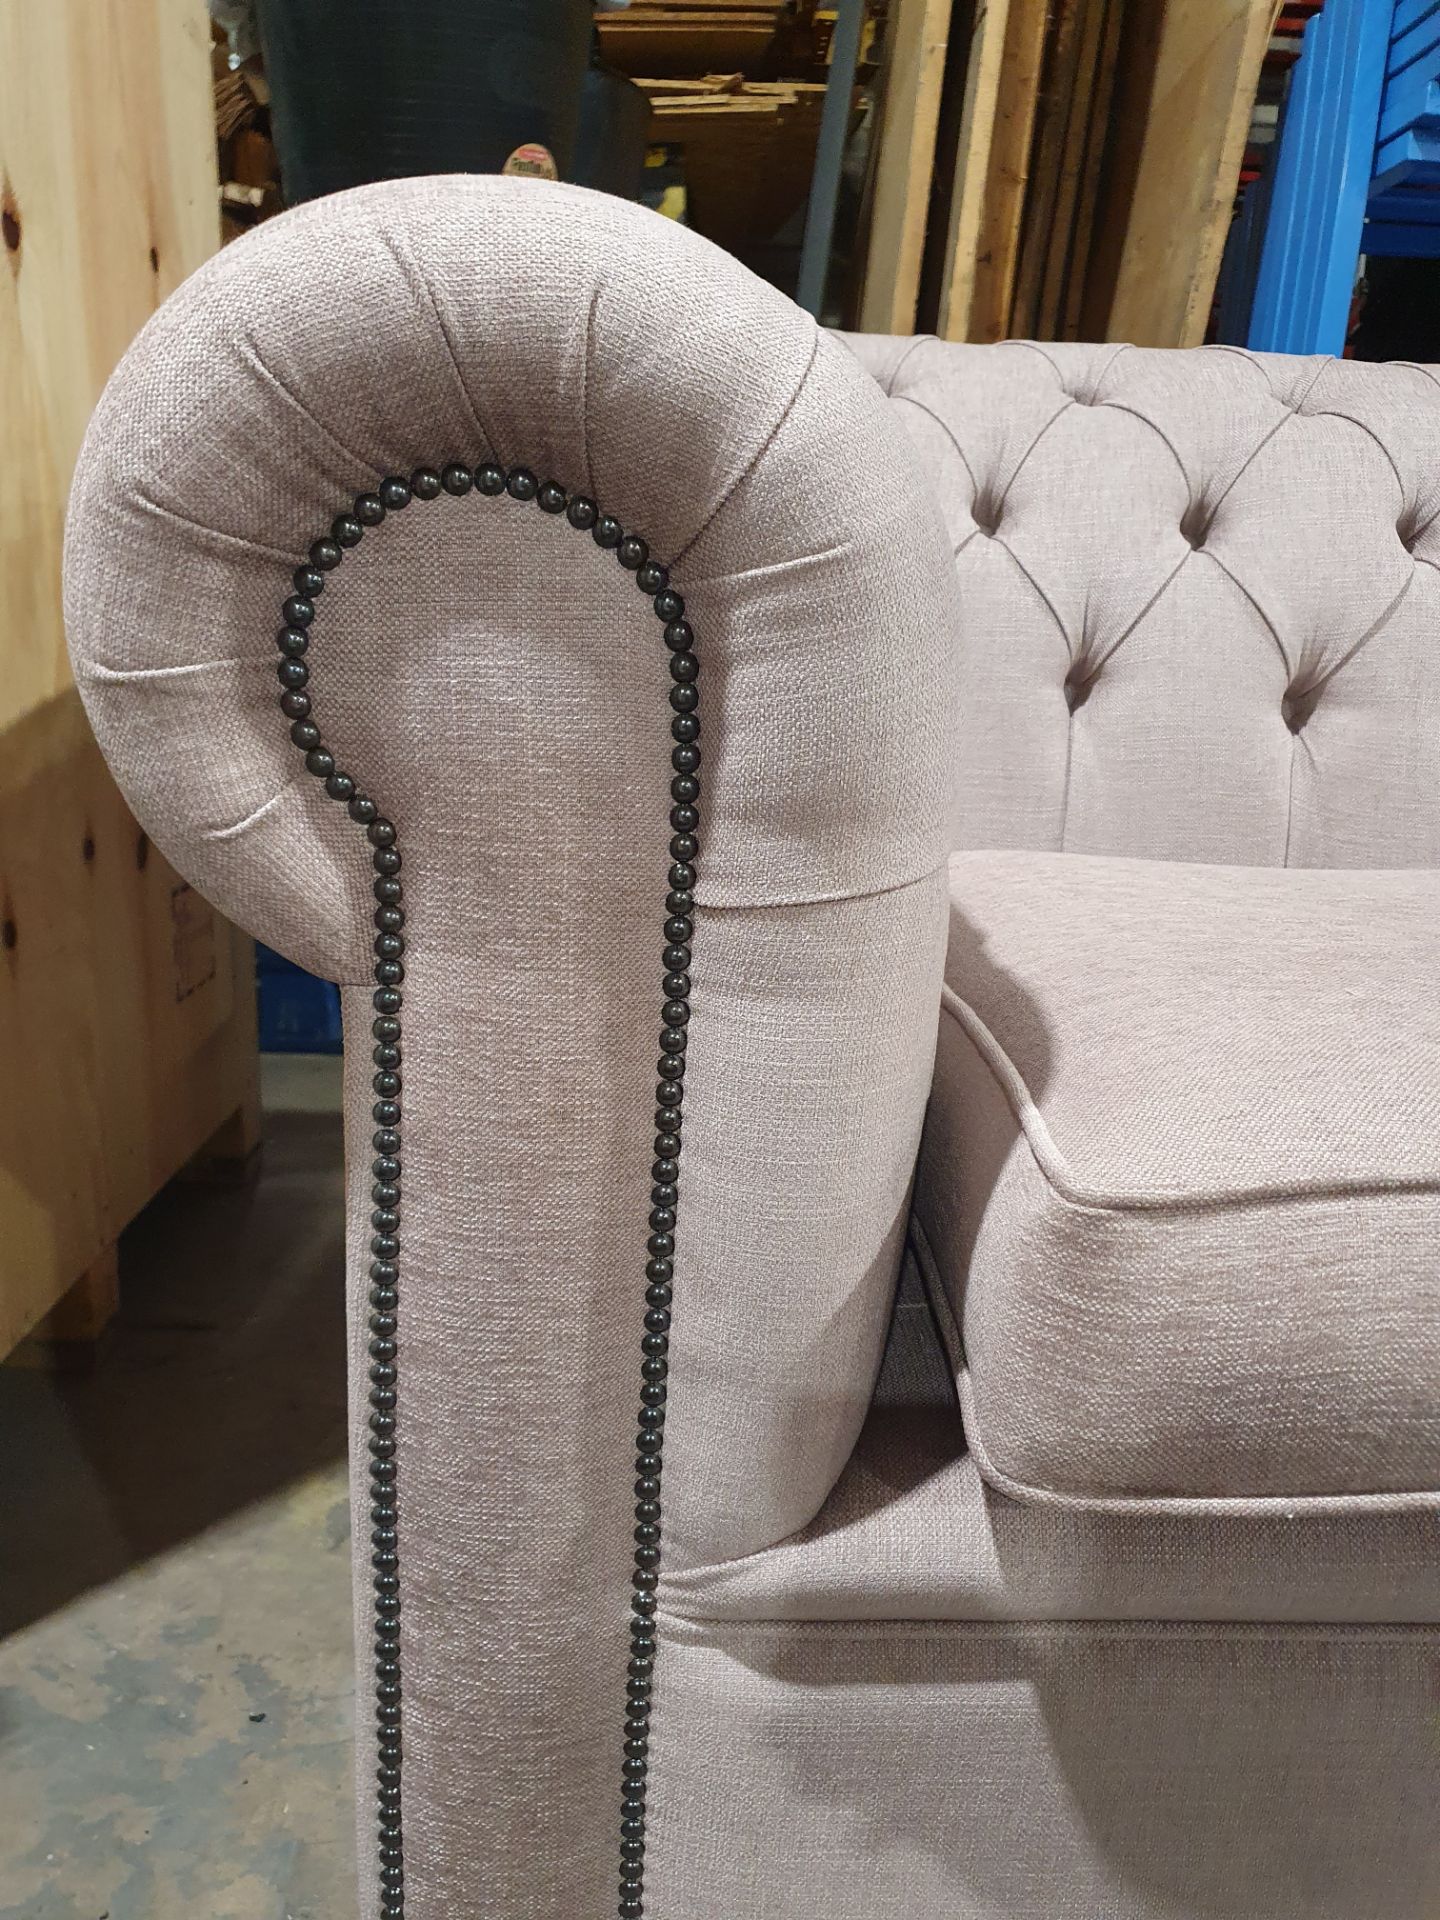 Bespoke Chesterfield 2 Unit Sofa - Image 7 of 9